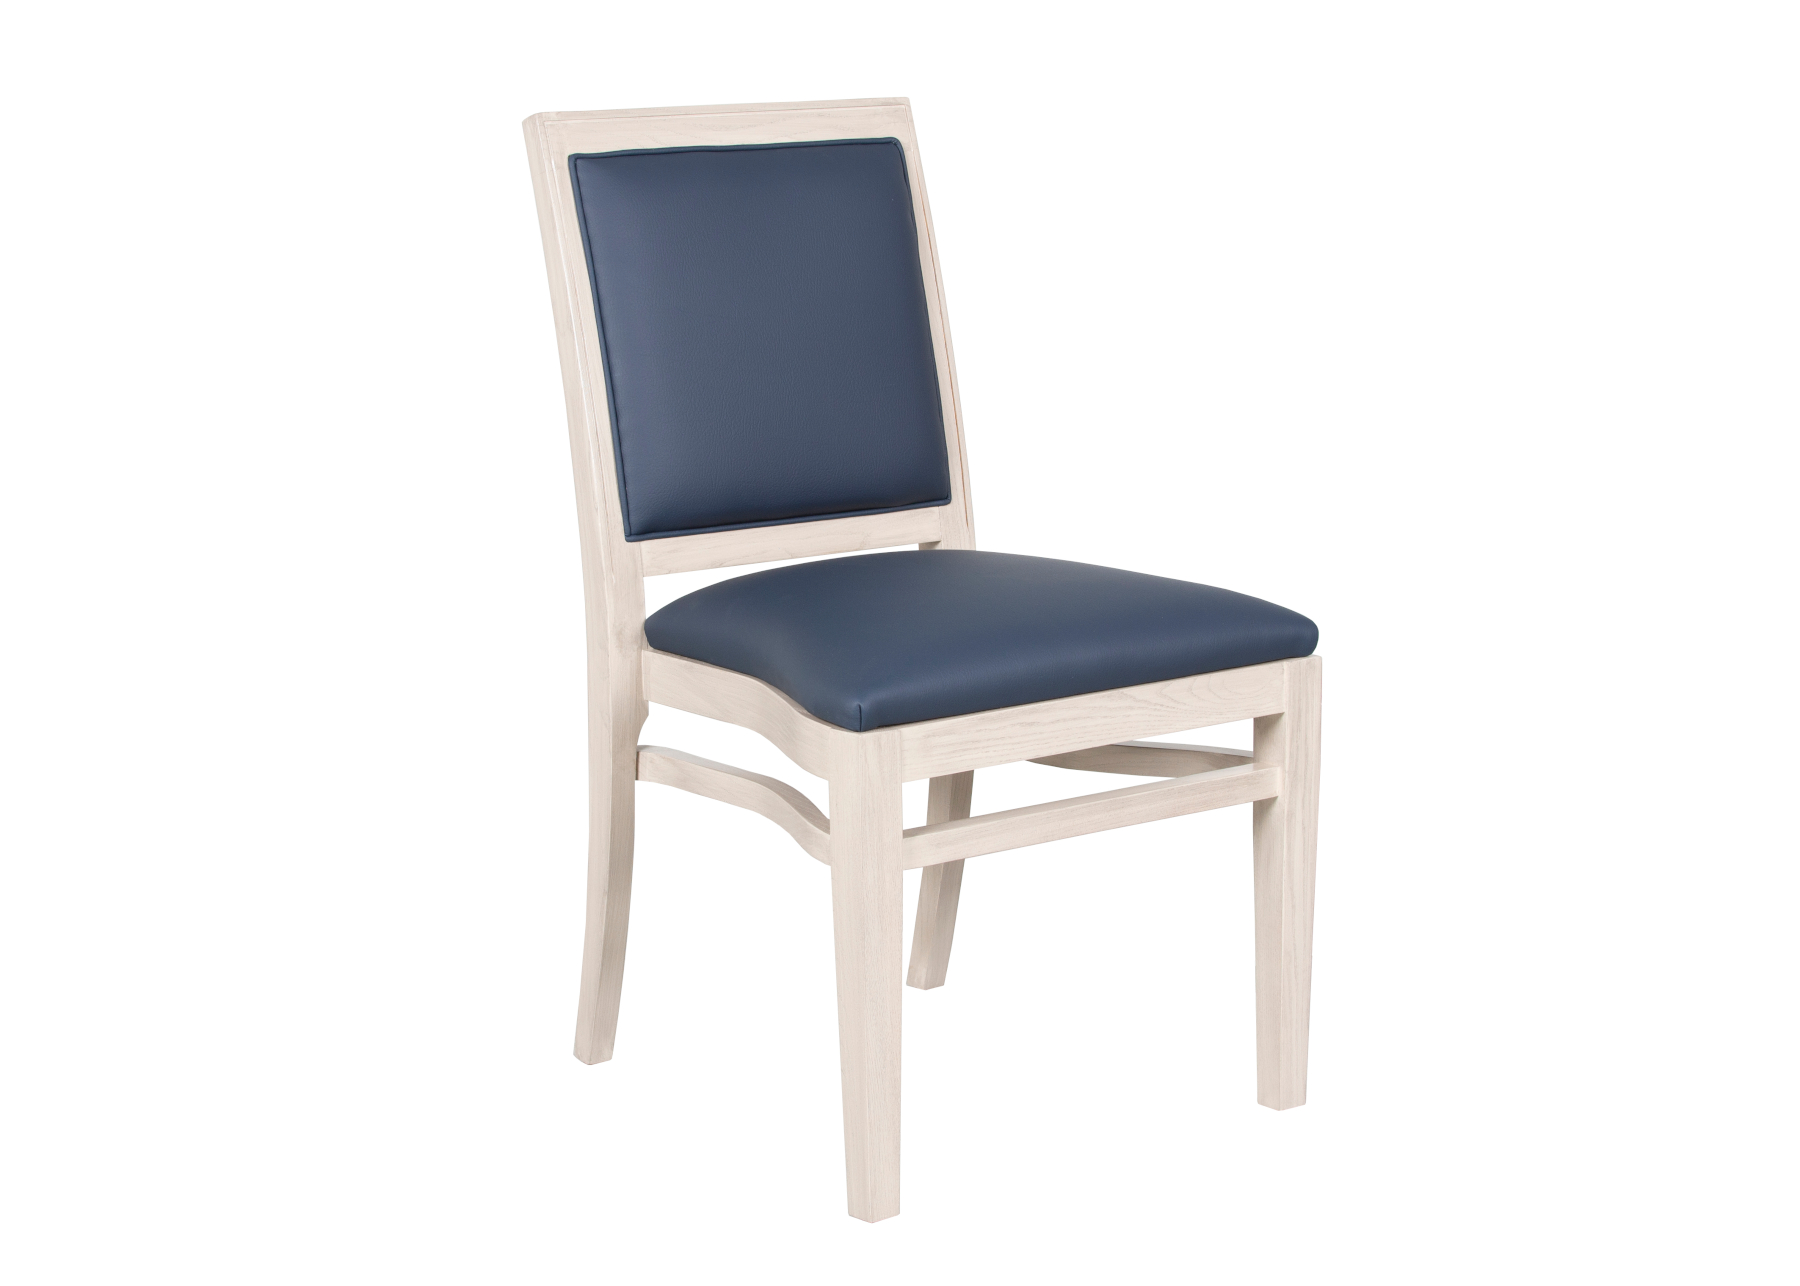  VOYAGE STACKING SIDE CHAIR